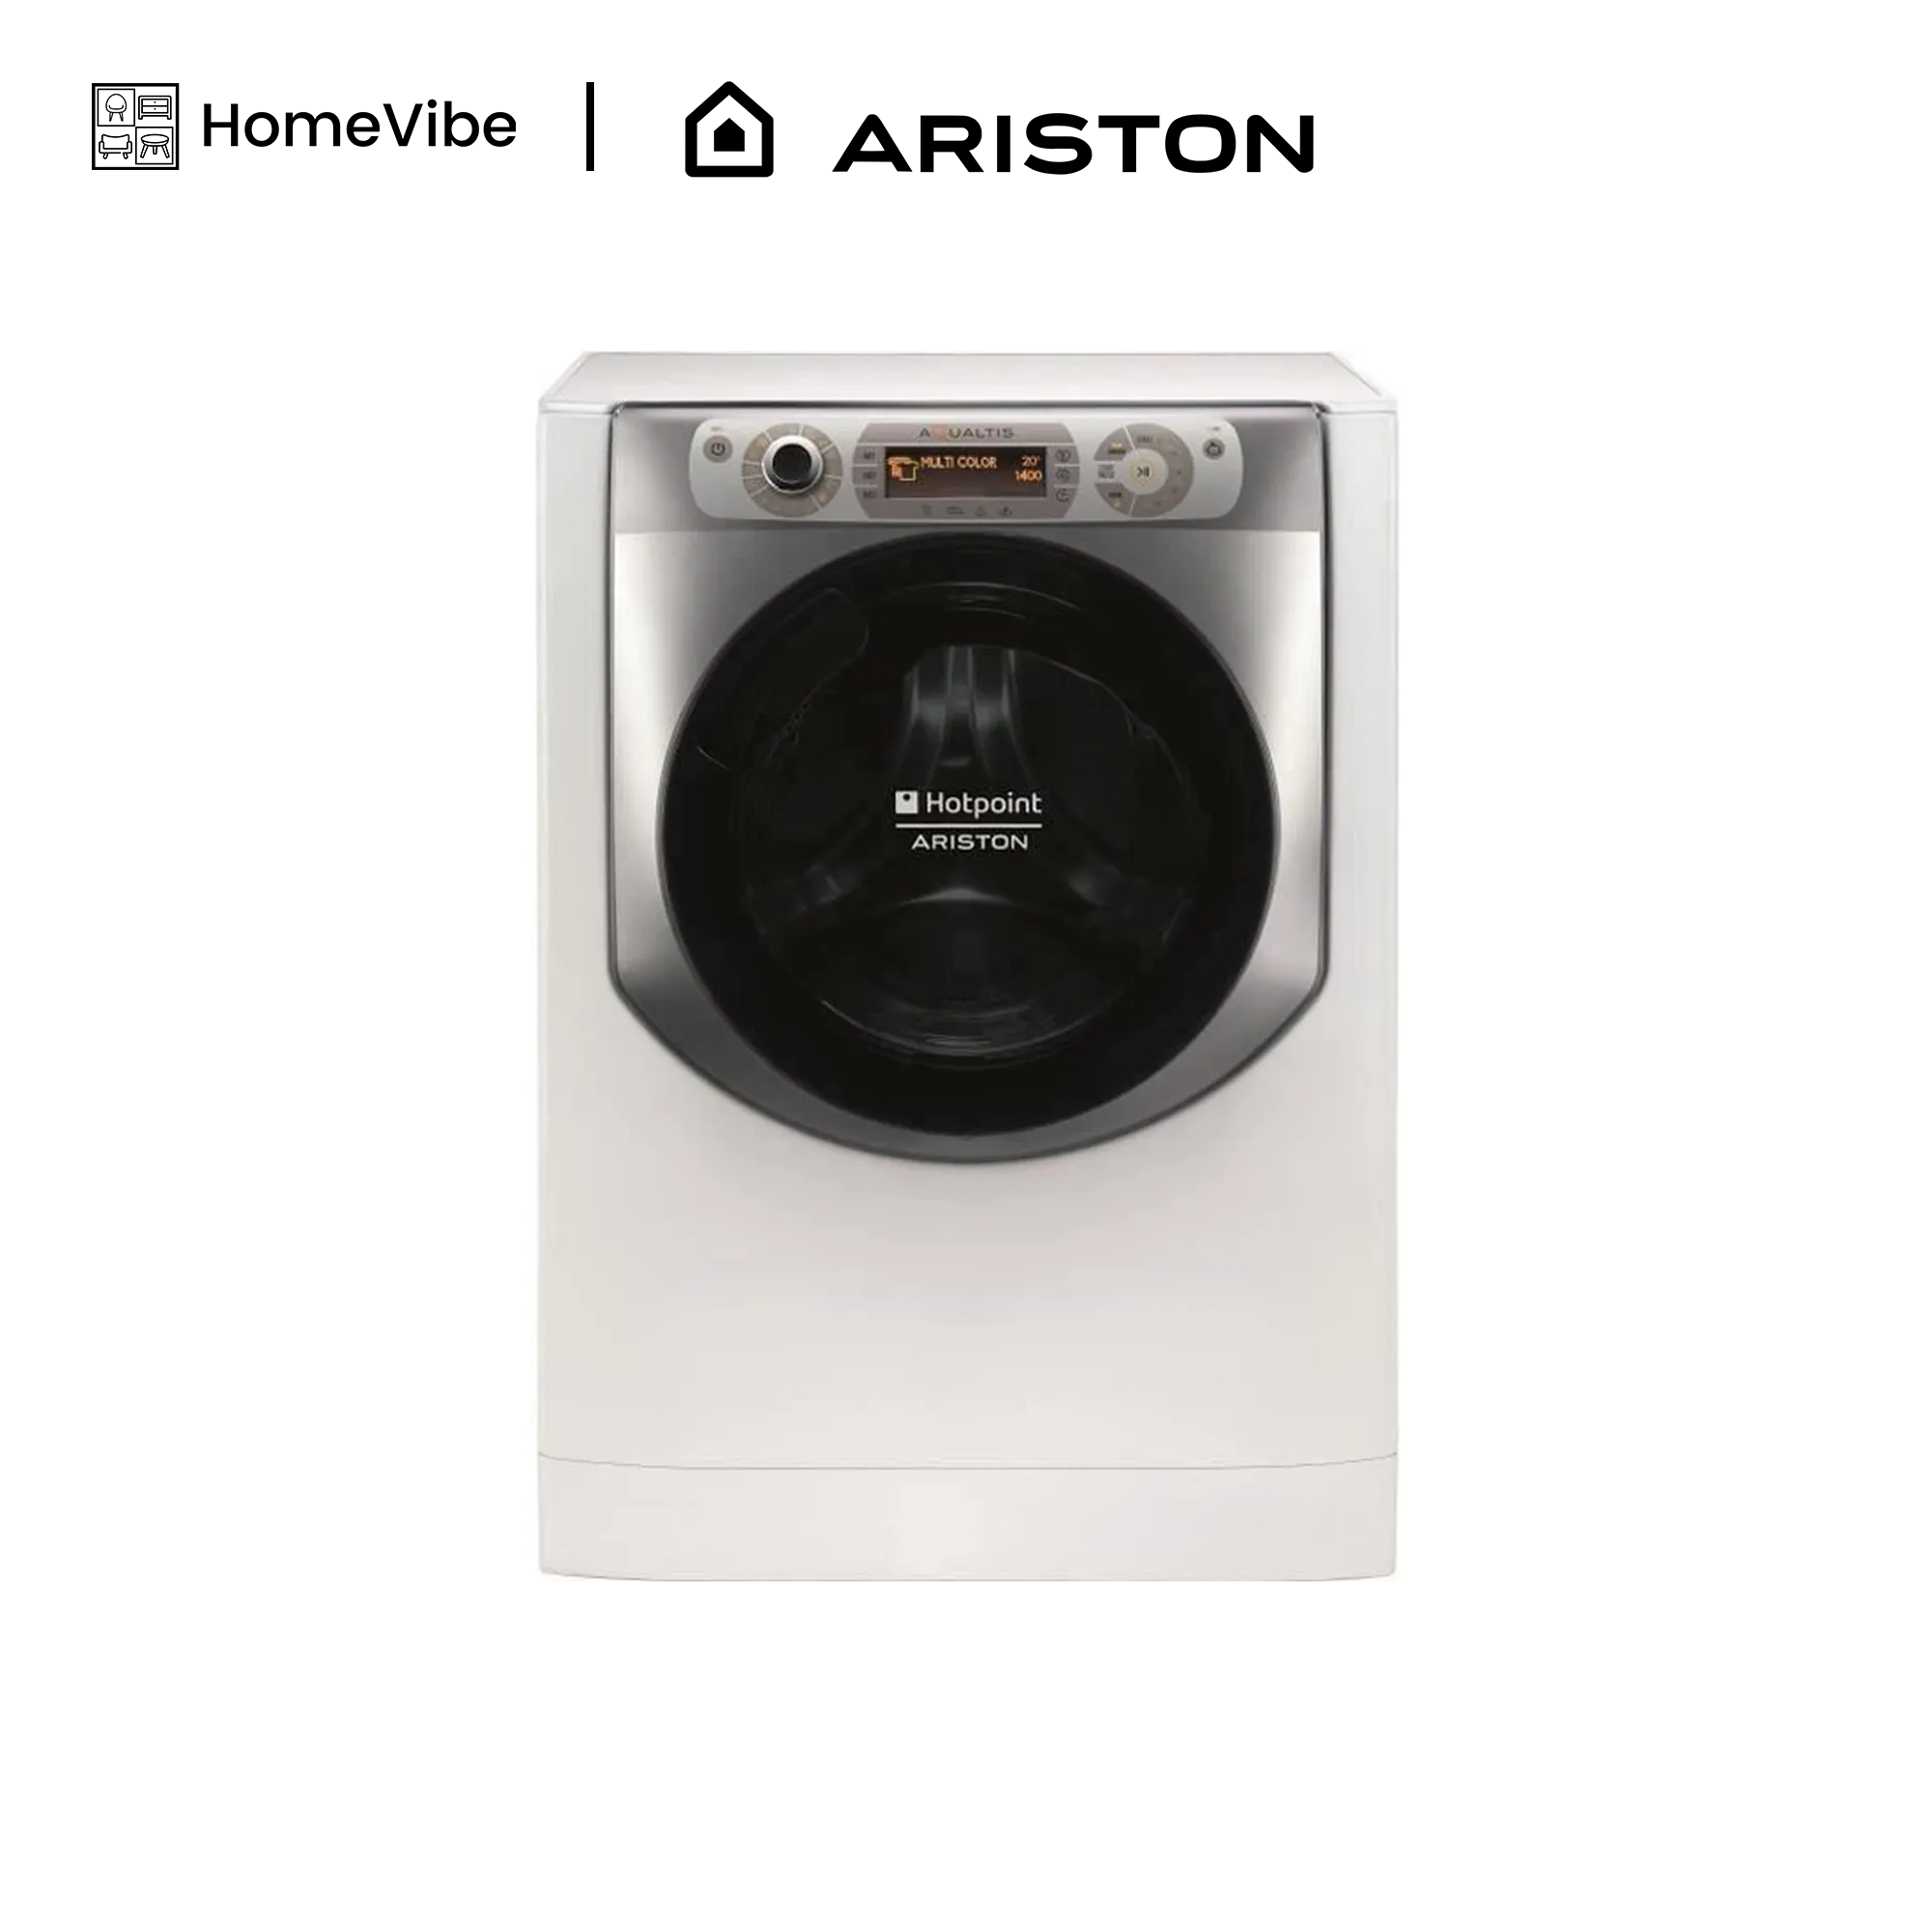 Ariston 9kg Washer with spin dry AQ92F 297 EX